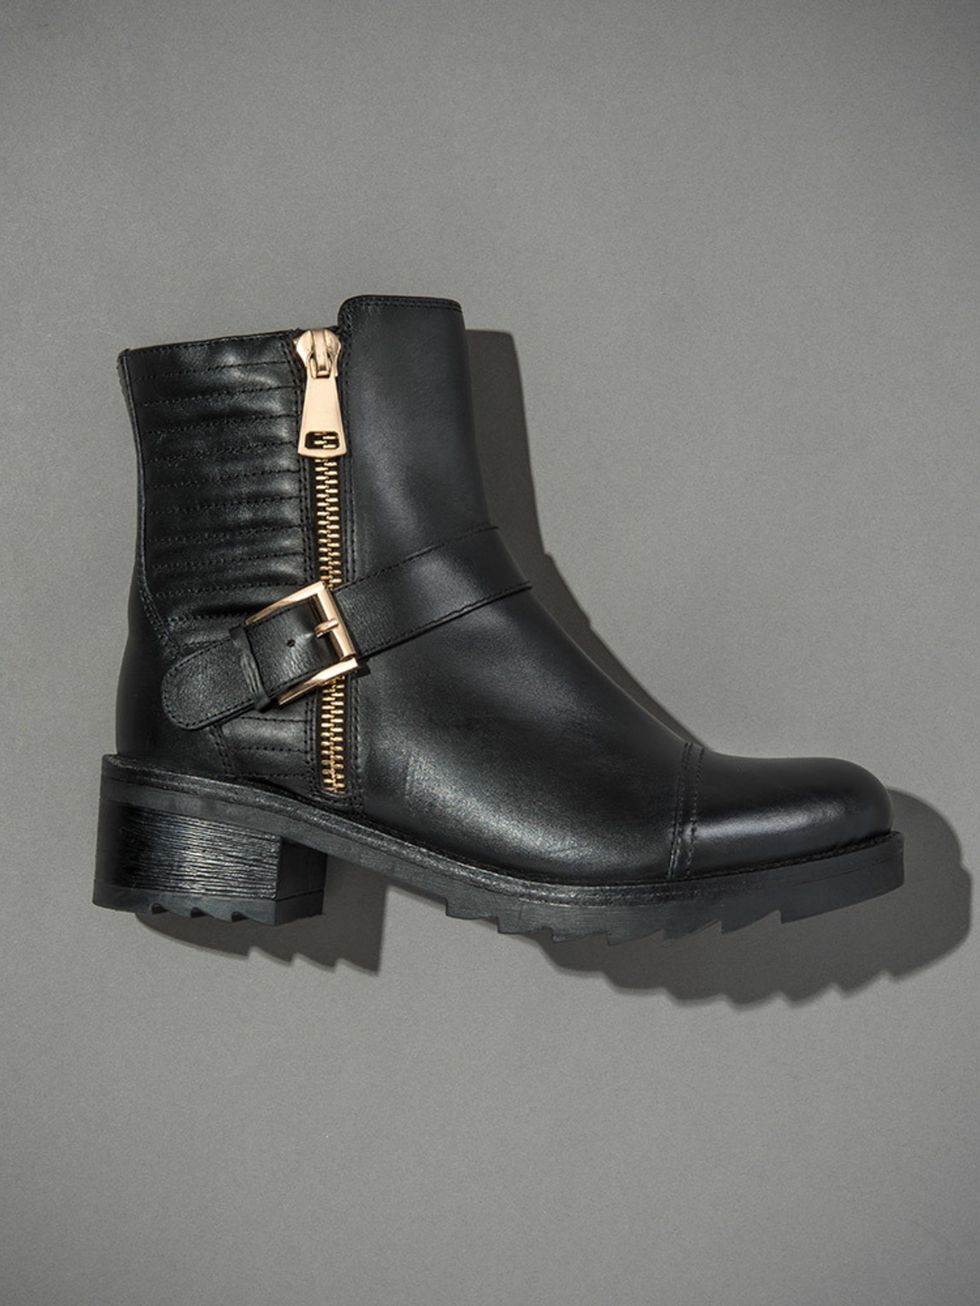 <p><a href="http://www.dunelondon.com/poloma-shark-sole-quilted-leather-biker-boot-0092508770002484/?utm_source=Elle-Magazine&utm_medium=Gallery&utm_content=Poloma-Black&utm_campaign=Elle-360">Poloma</a> - £115</p>